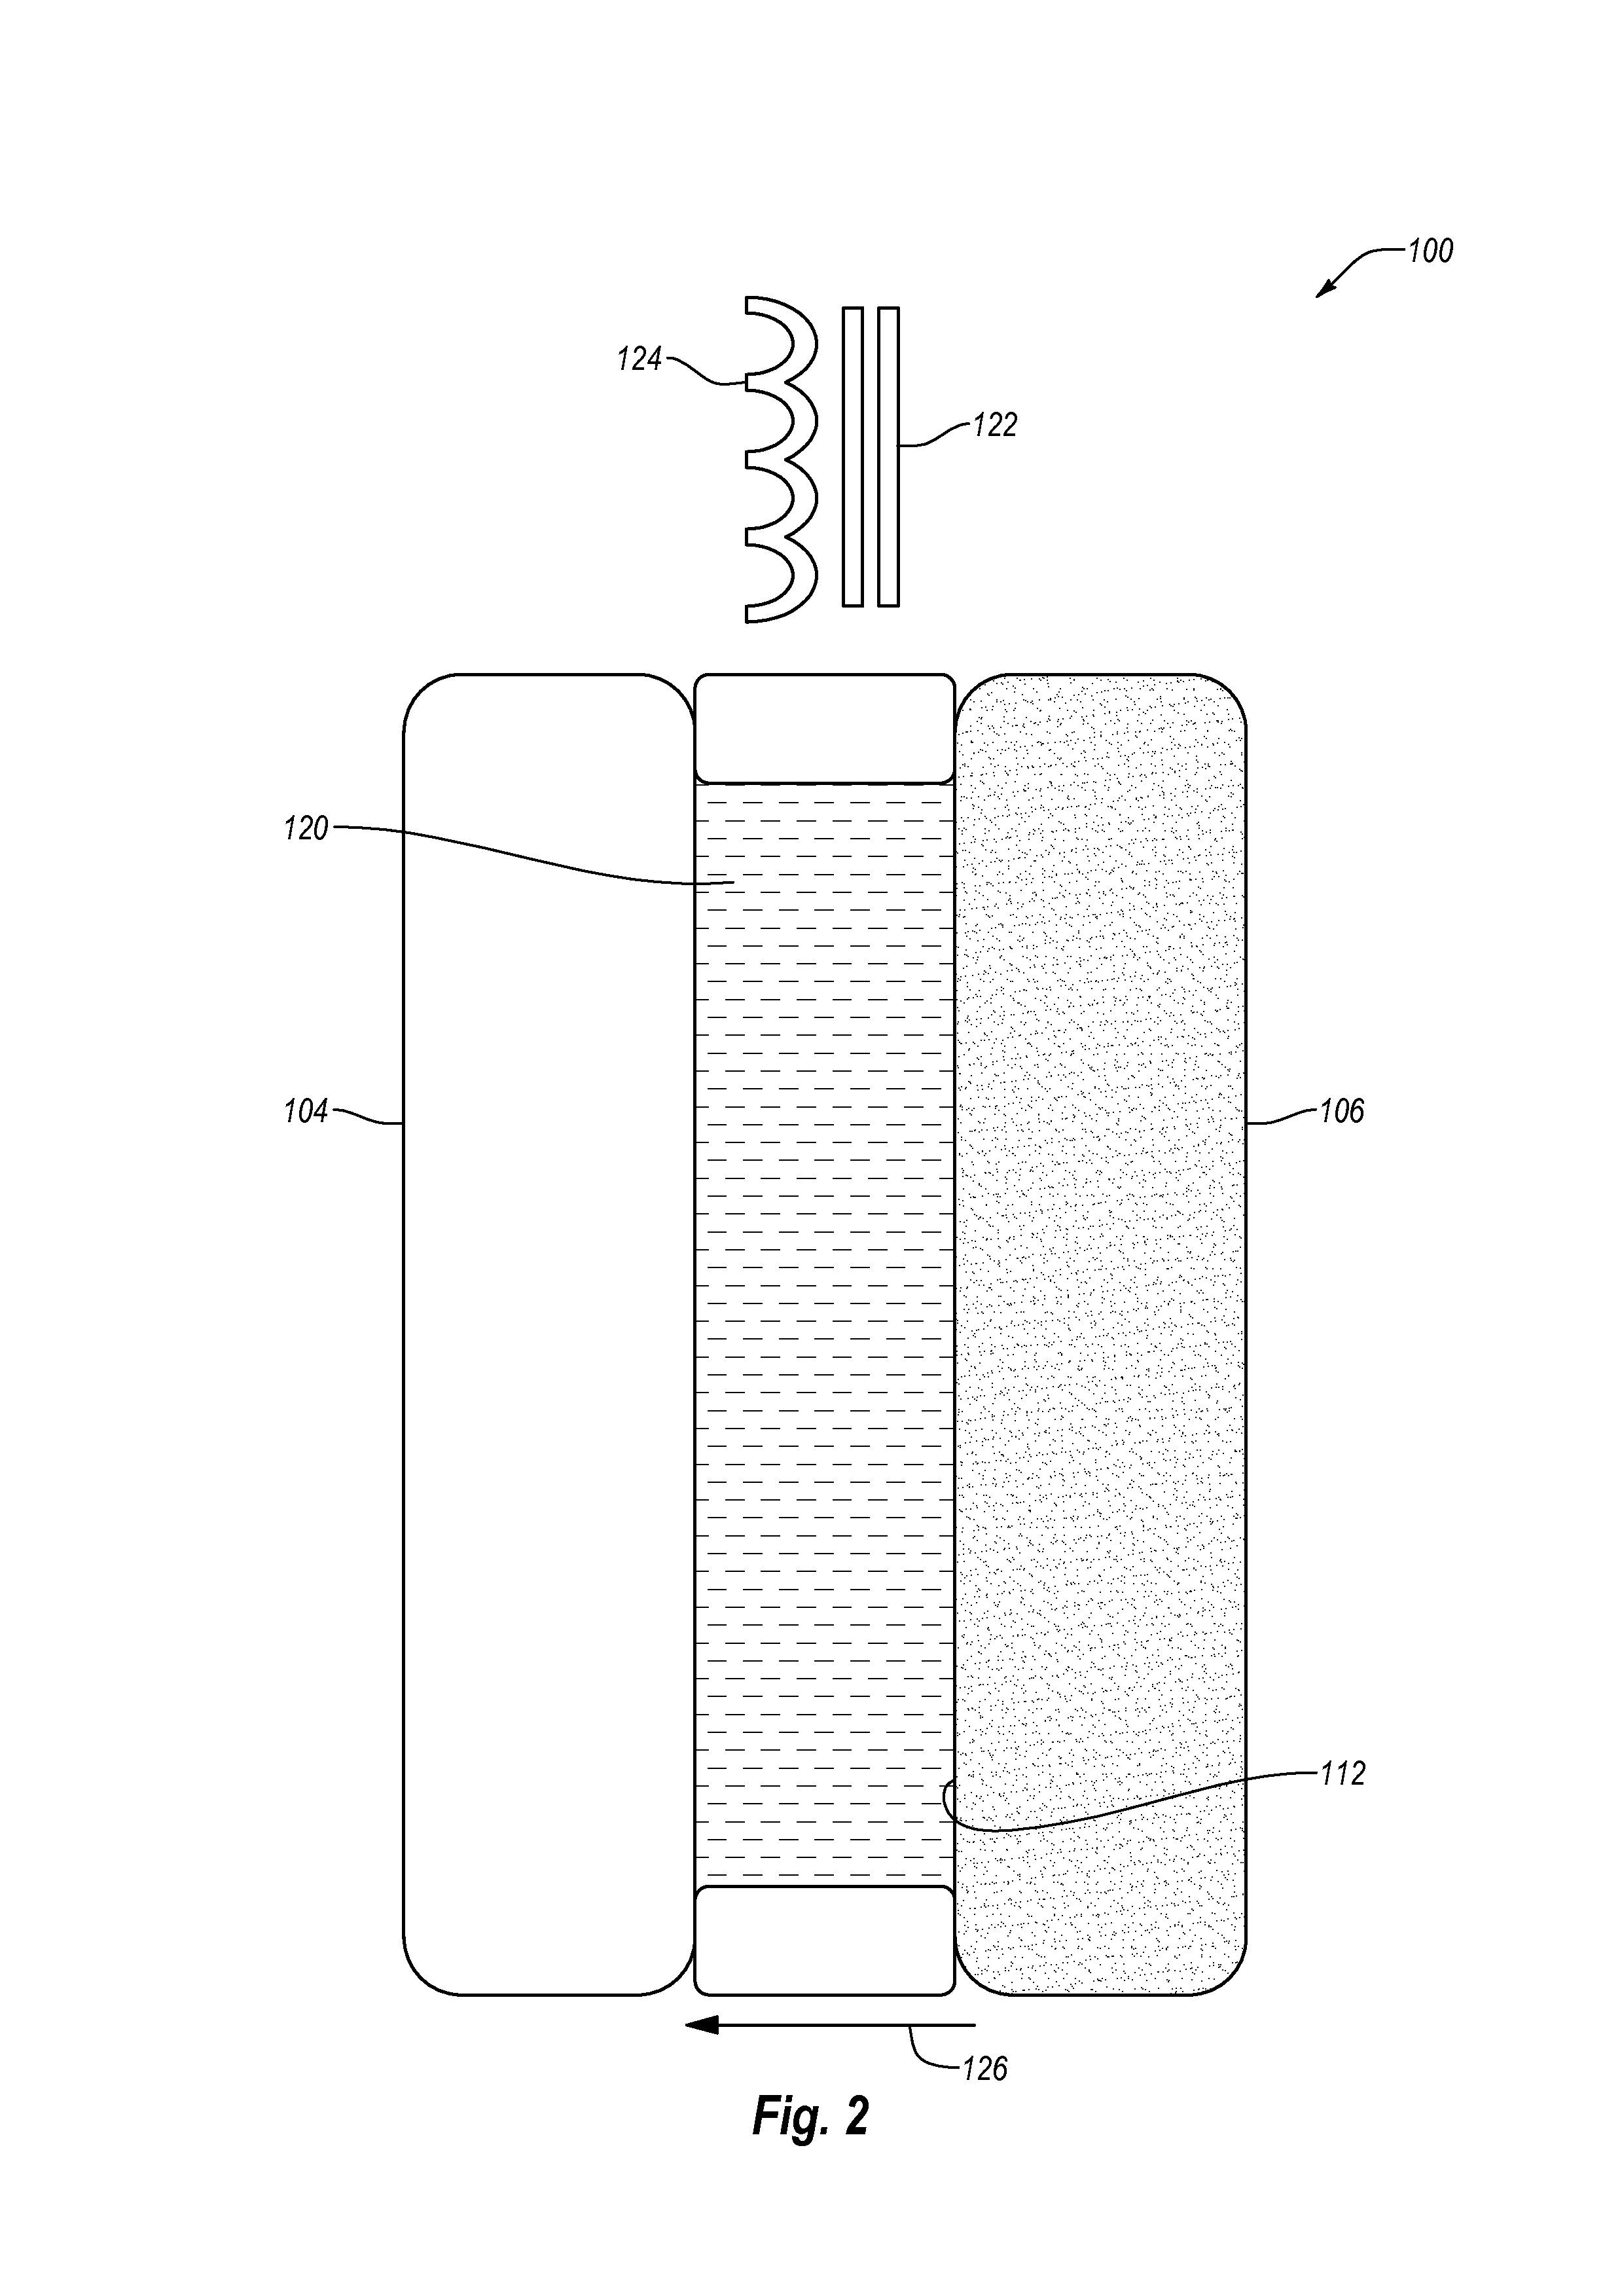 Systems and methods for extracting non-polar lipids from an aqueous algae slurry and lipids produced therefrom